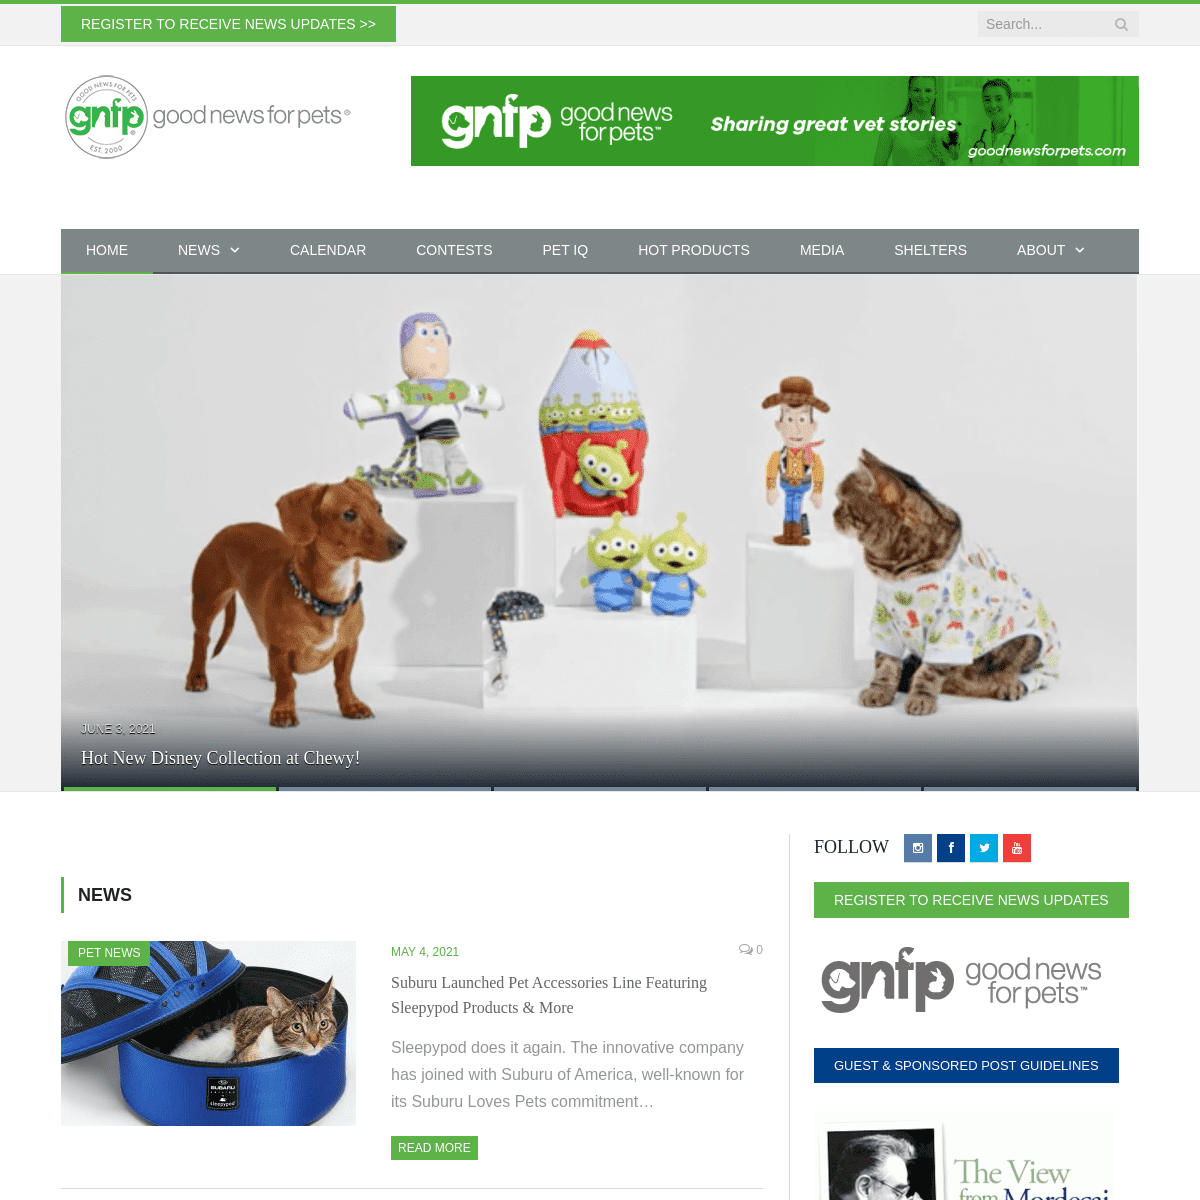 A complete backup of https://goodnewsforpets.com